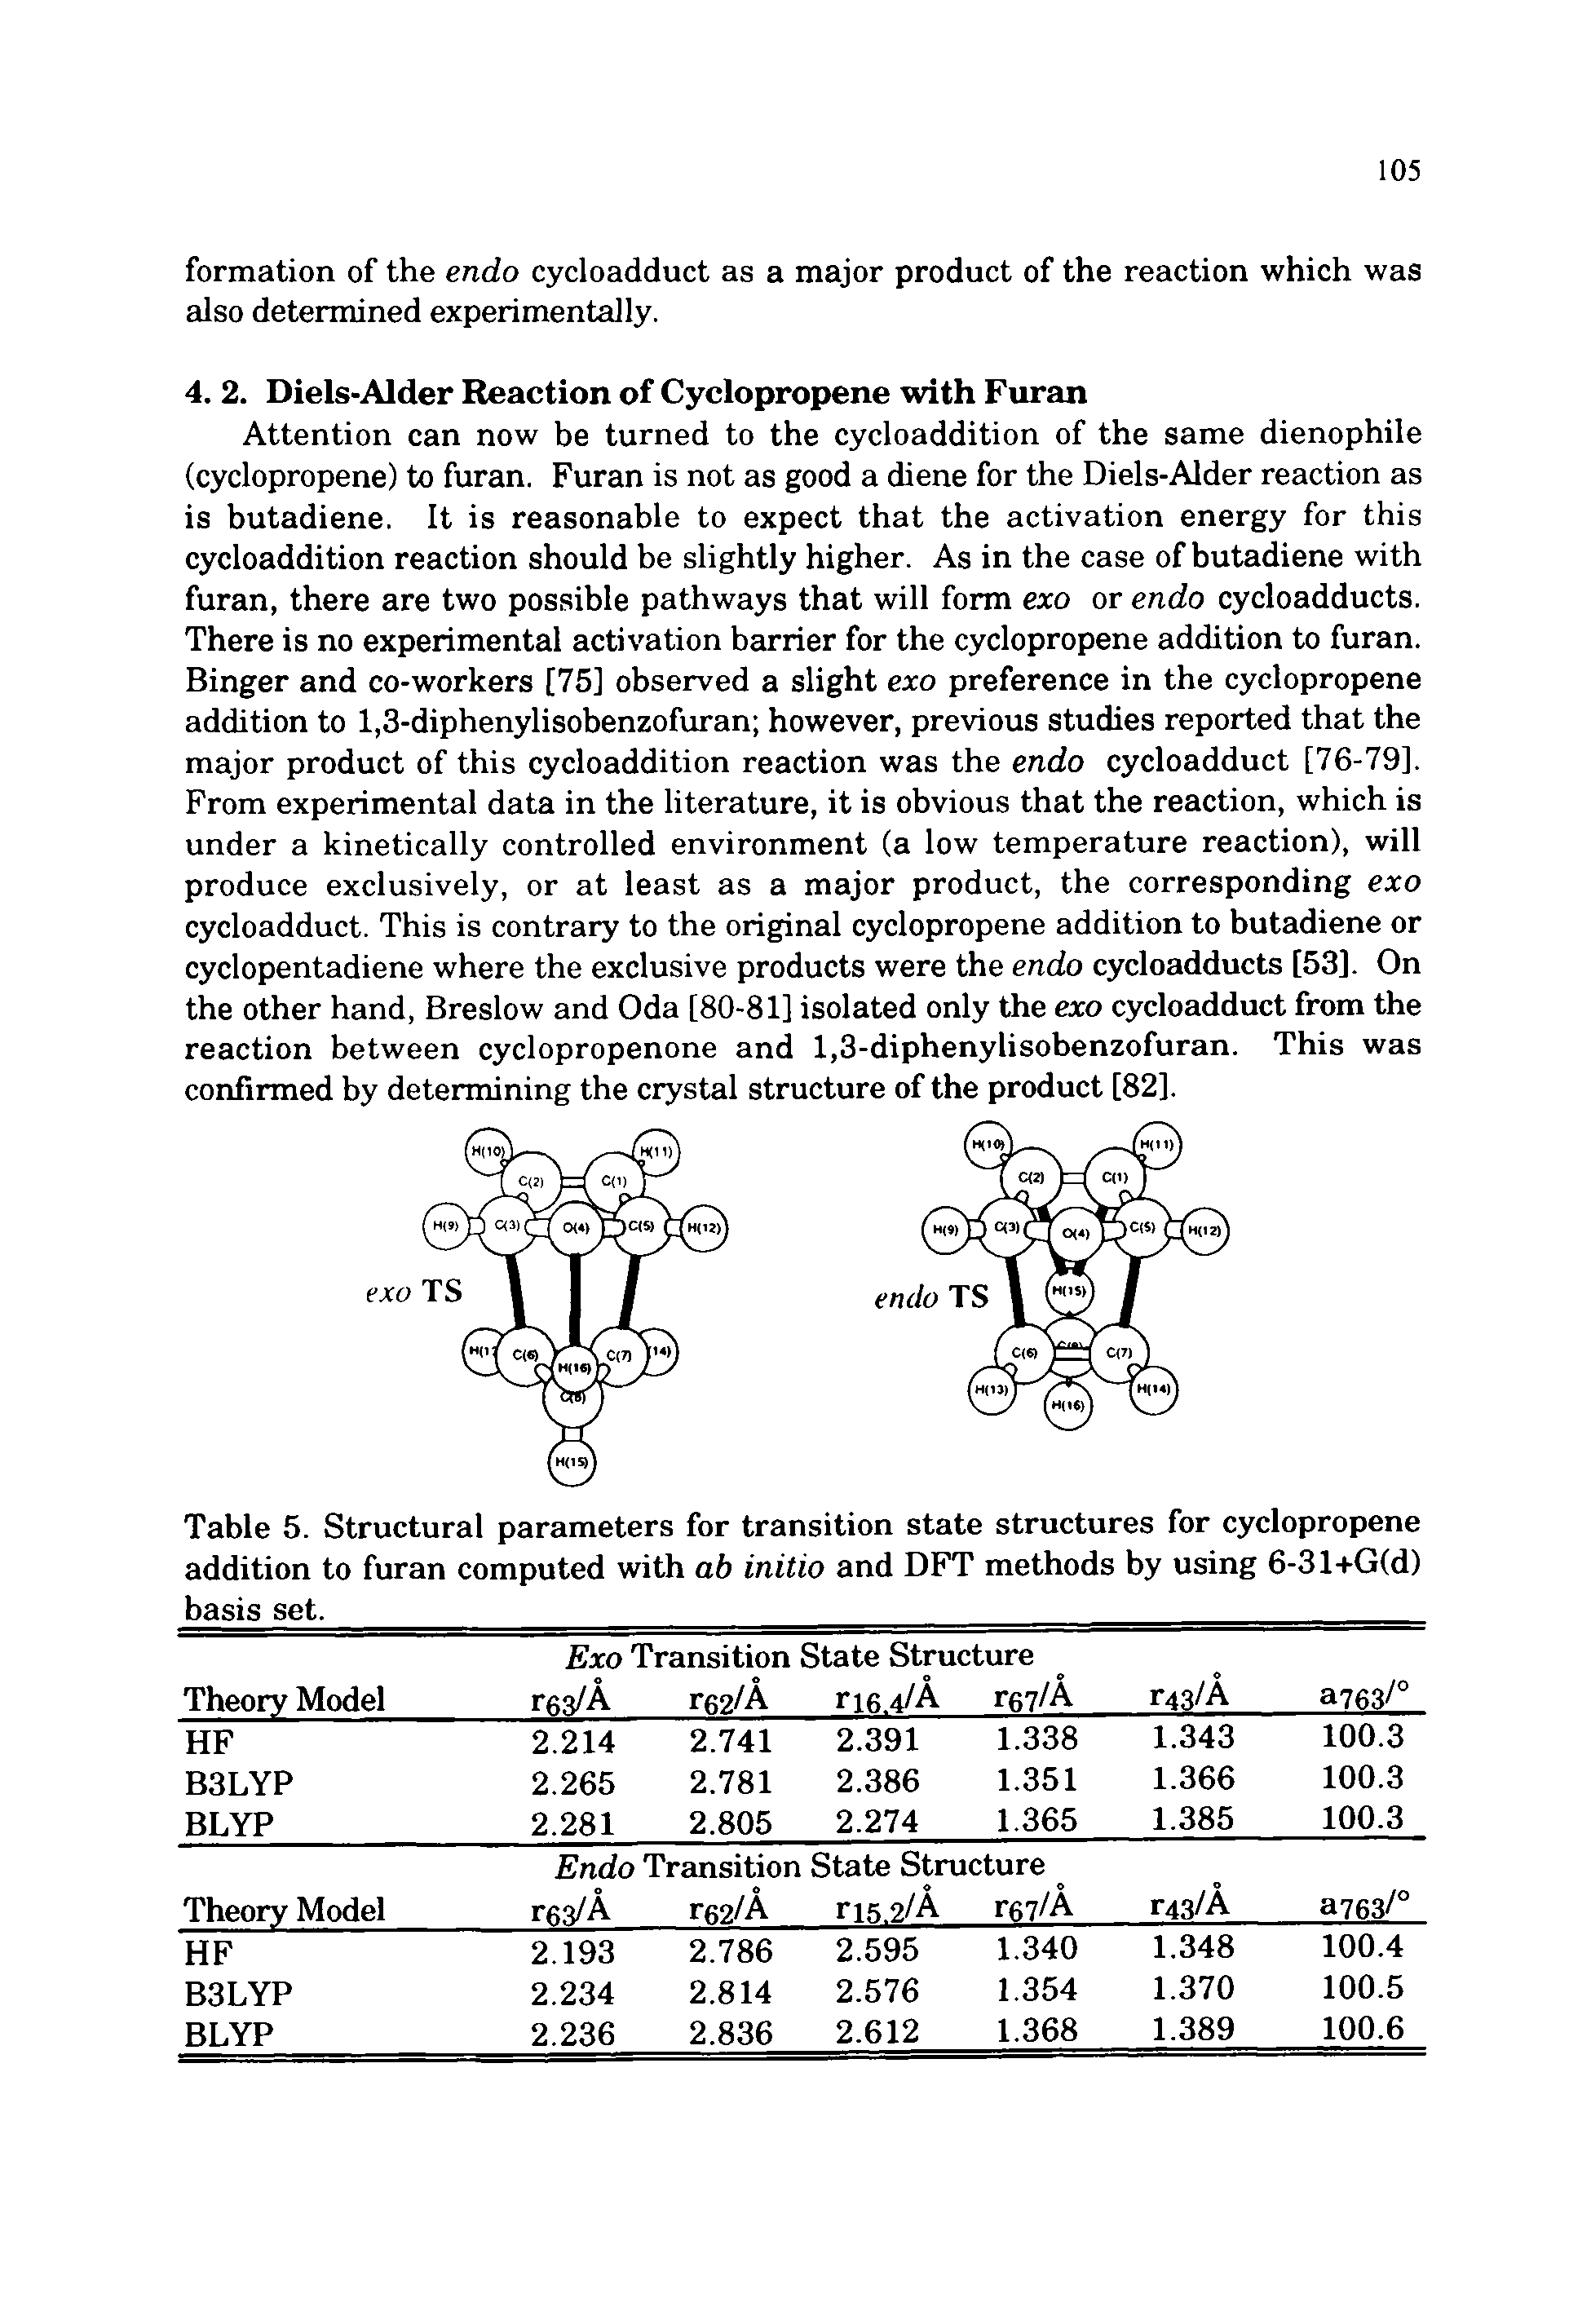 Table 5. Structural parameters for transition state structures for cyclopropene addition to furan computed with ab initio and DFT methods by using 6-31+G(d) basis set.